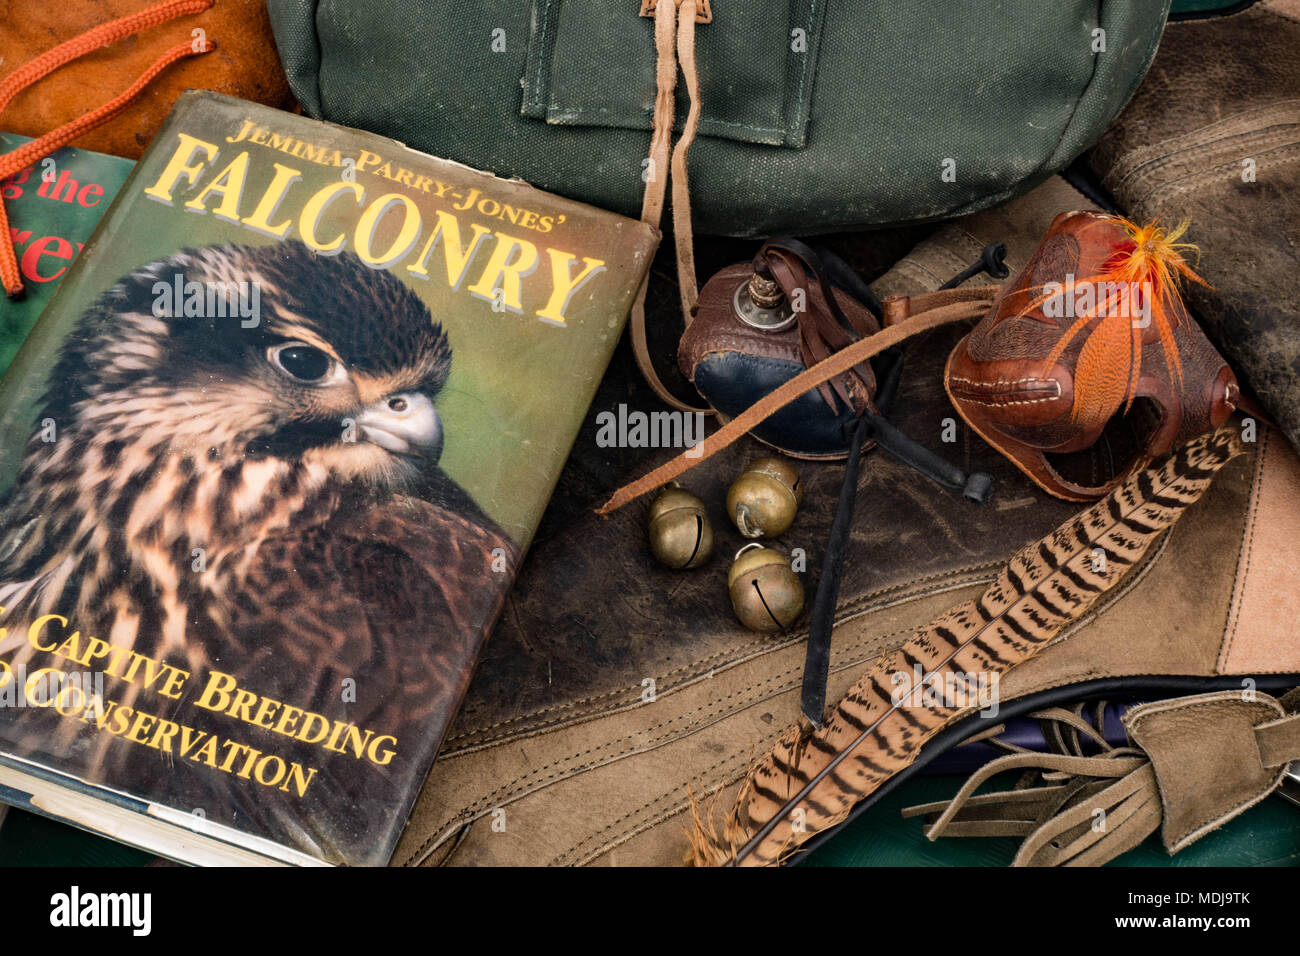 Collection of falconry items displayed on table. Wales. Stock Photo